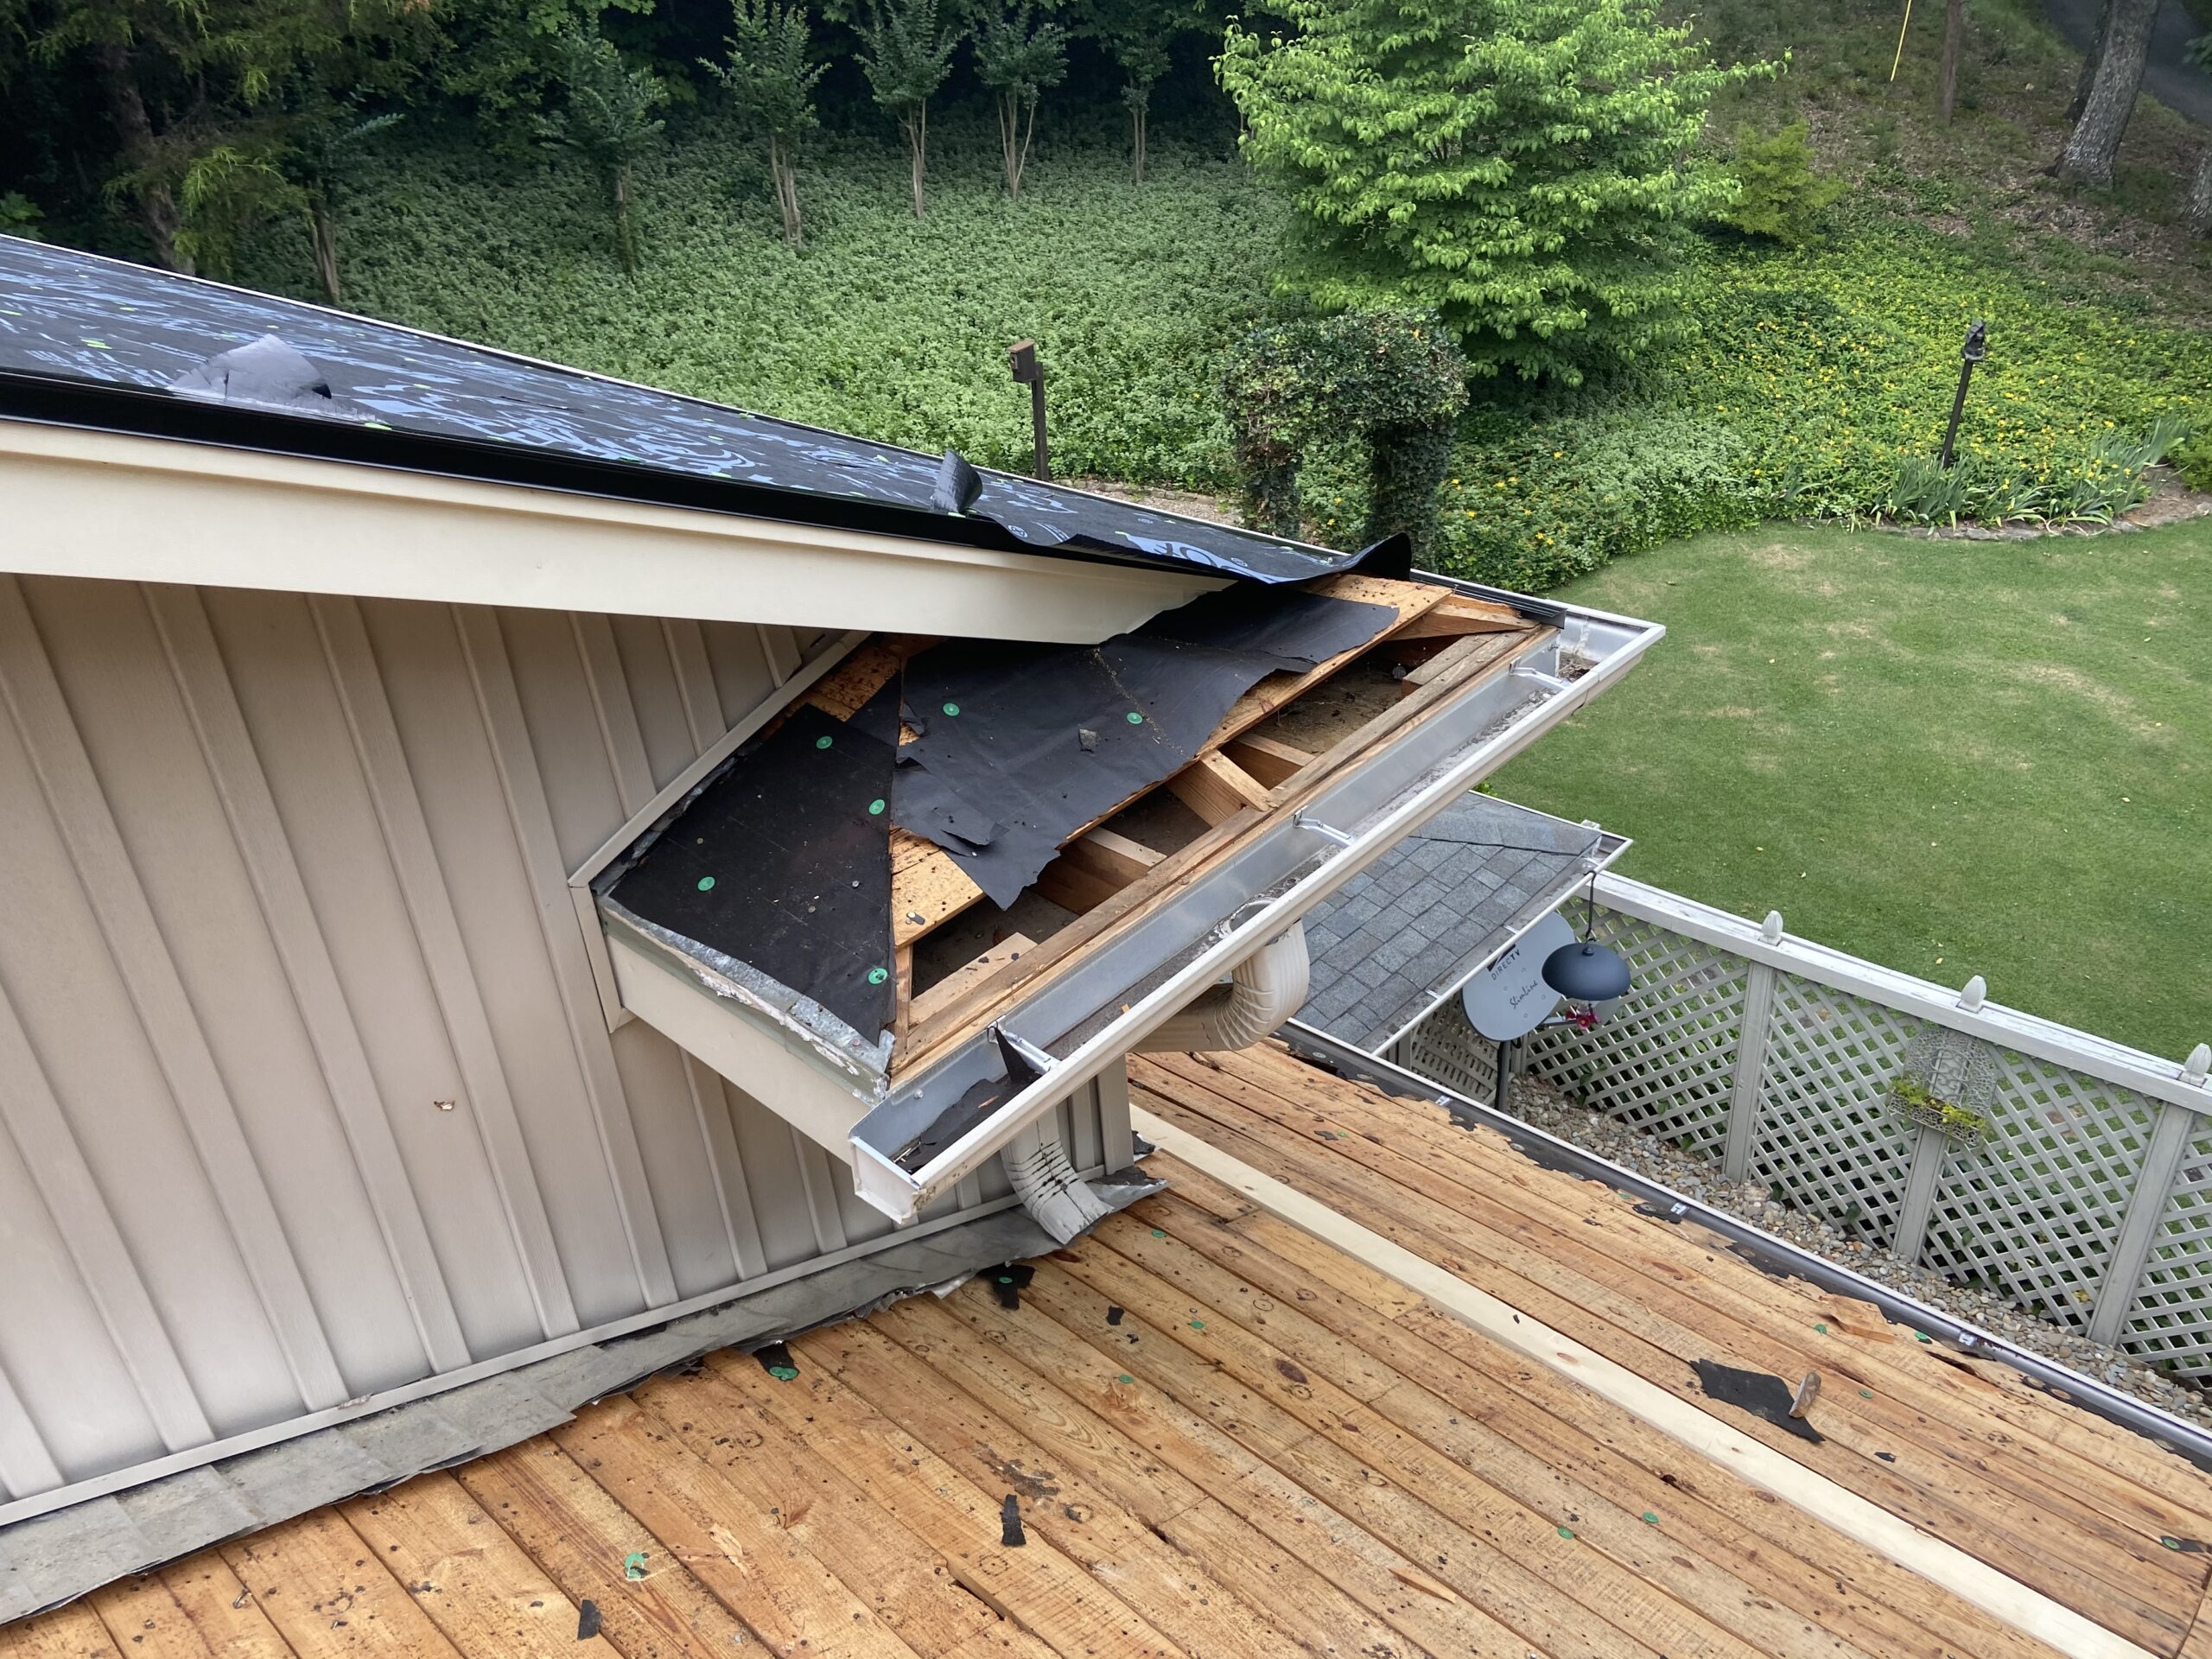 This is a picture of the deck boards  and deck boards at the eave of the roof that needs to be replaced.